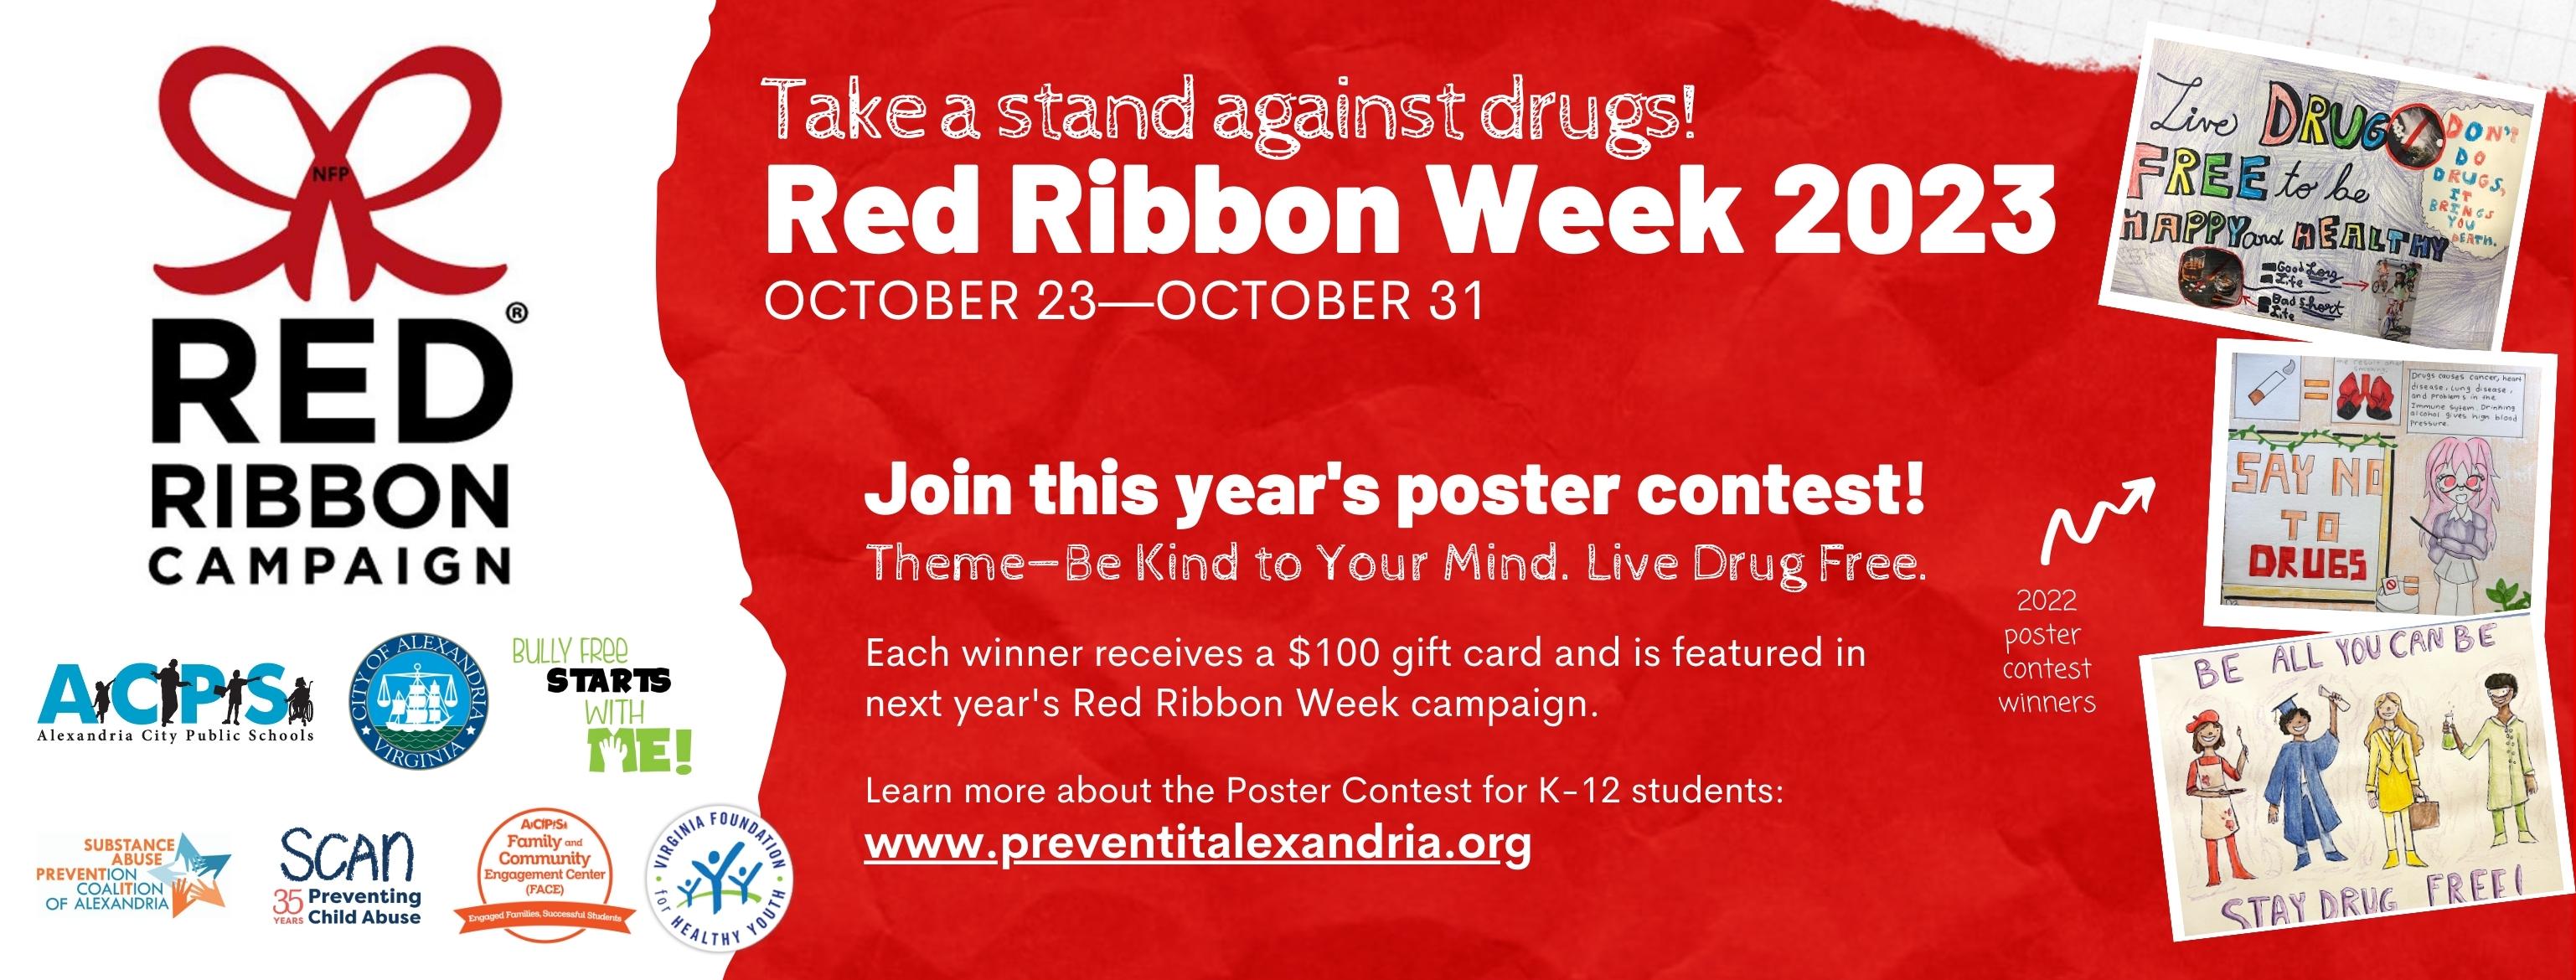 Red Ribbon Week inspires students to be drug free